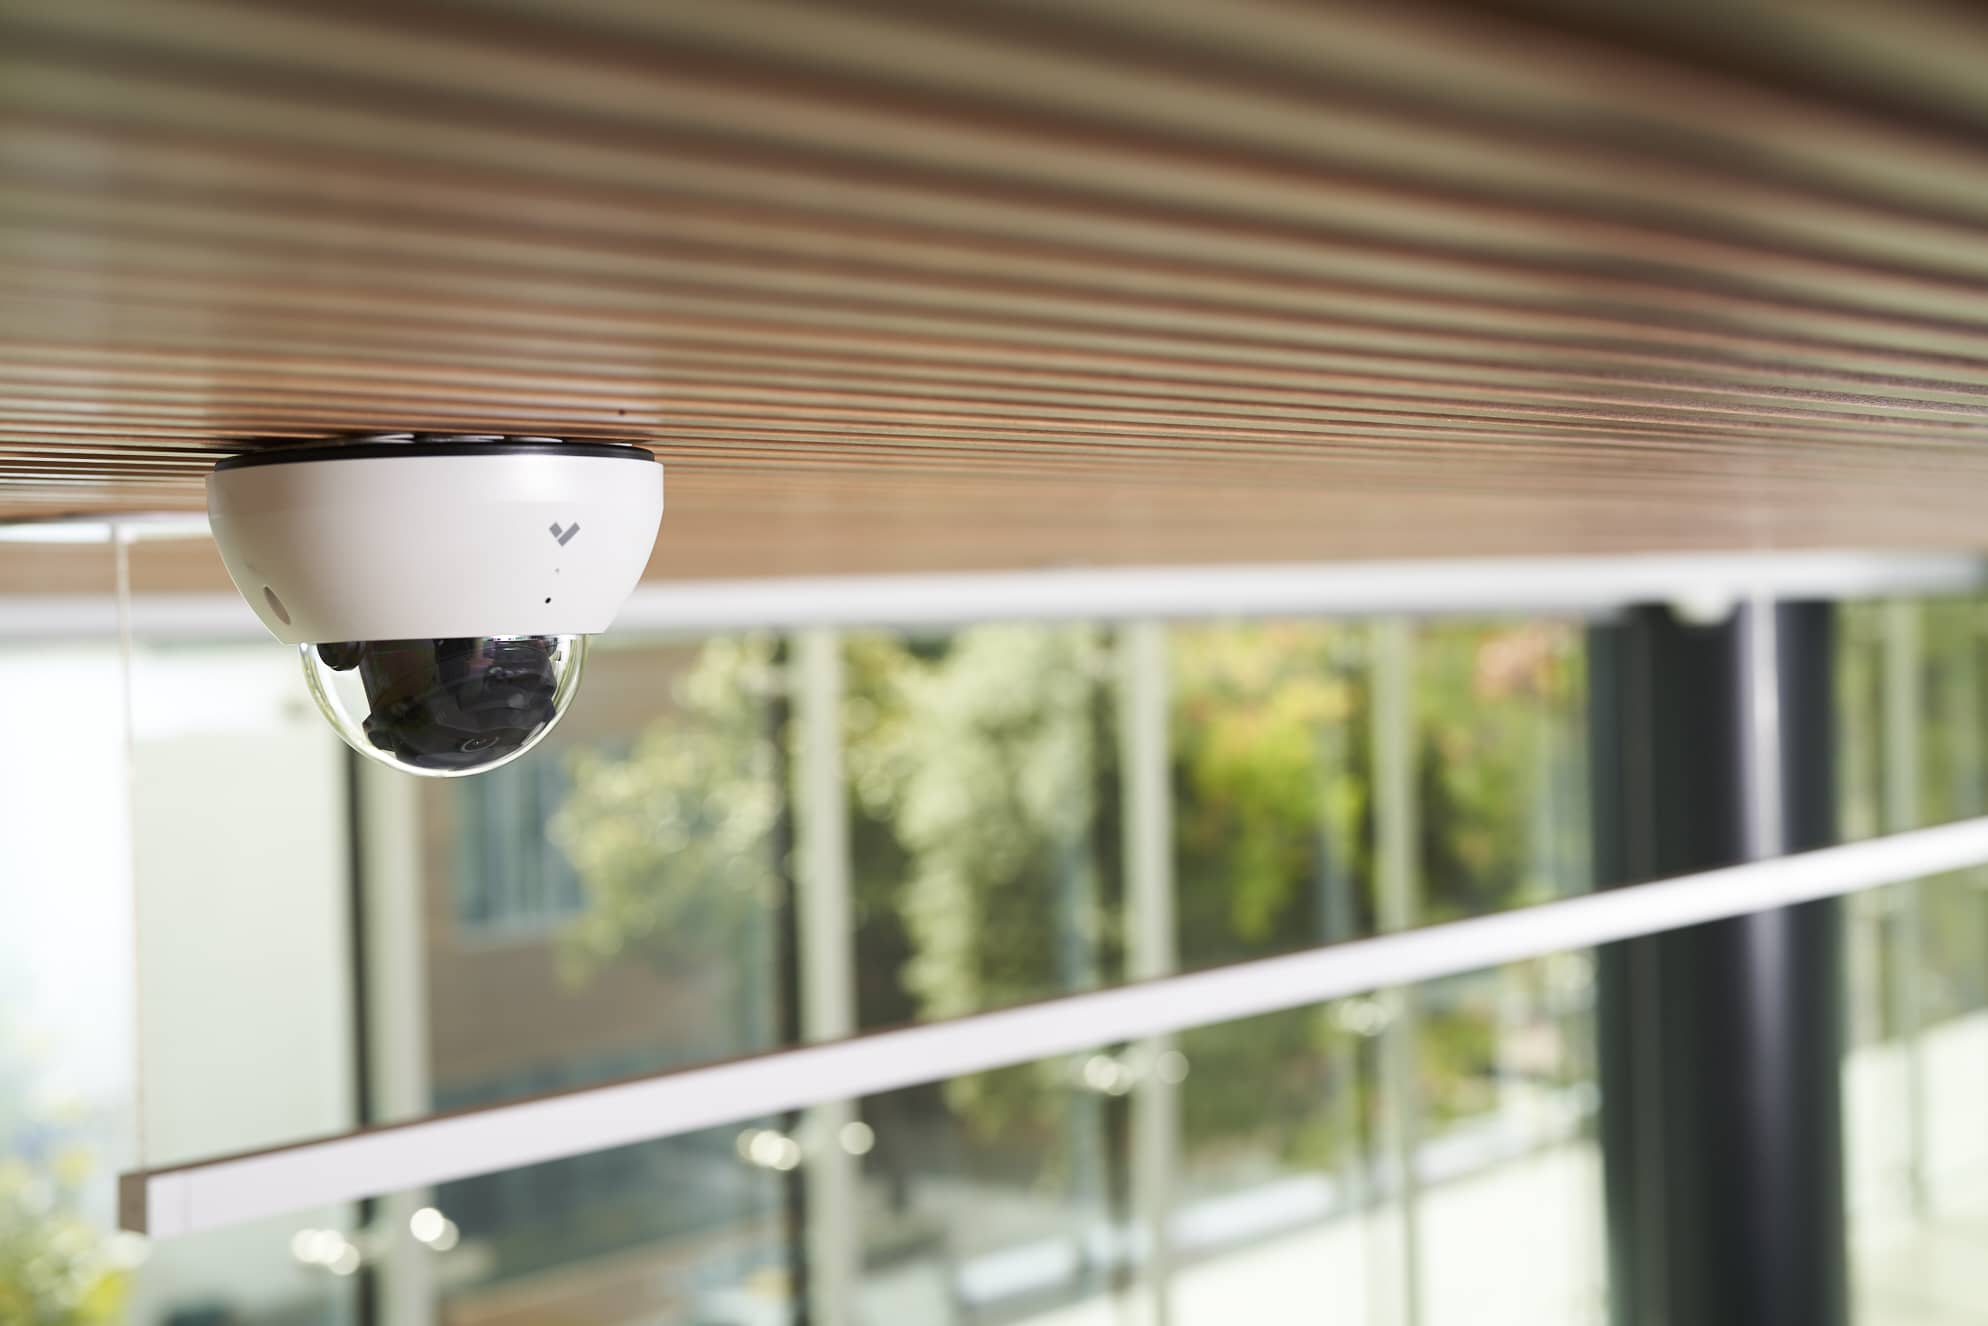 Verkada Review: How Far Can Dome Cameras See?